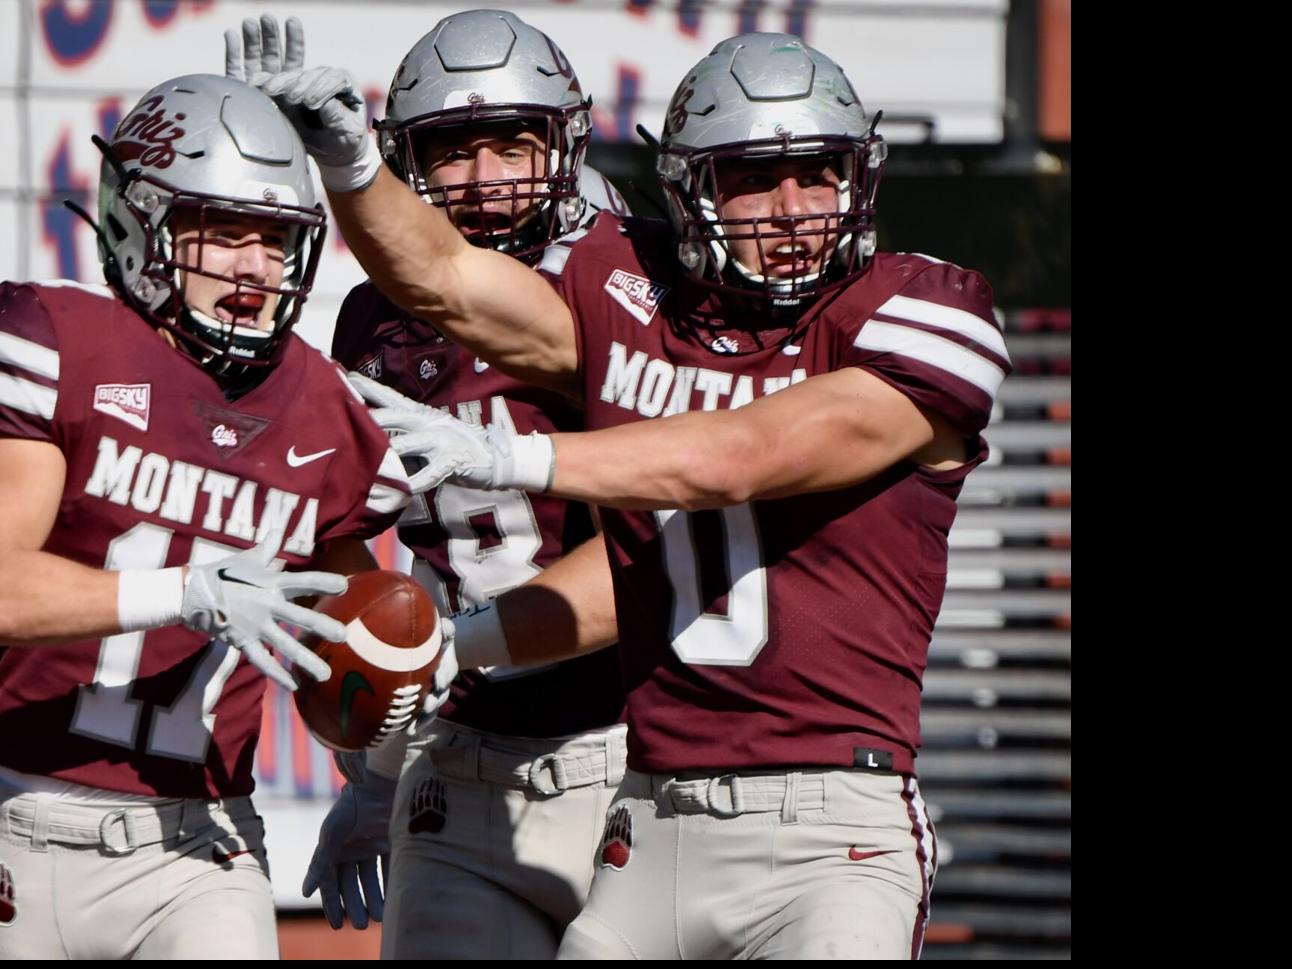 Records fall as Montana Griz roll past Portland State 53-16